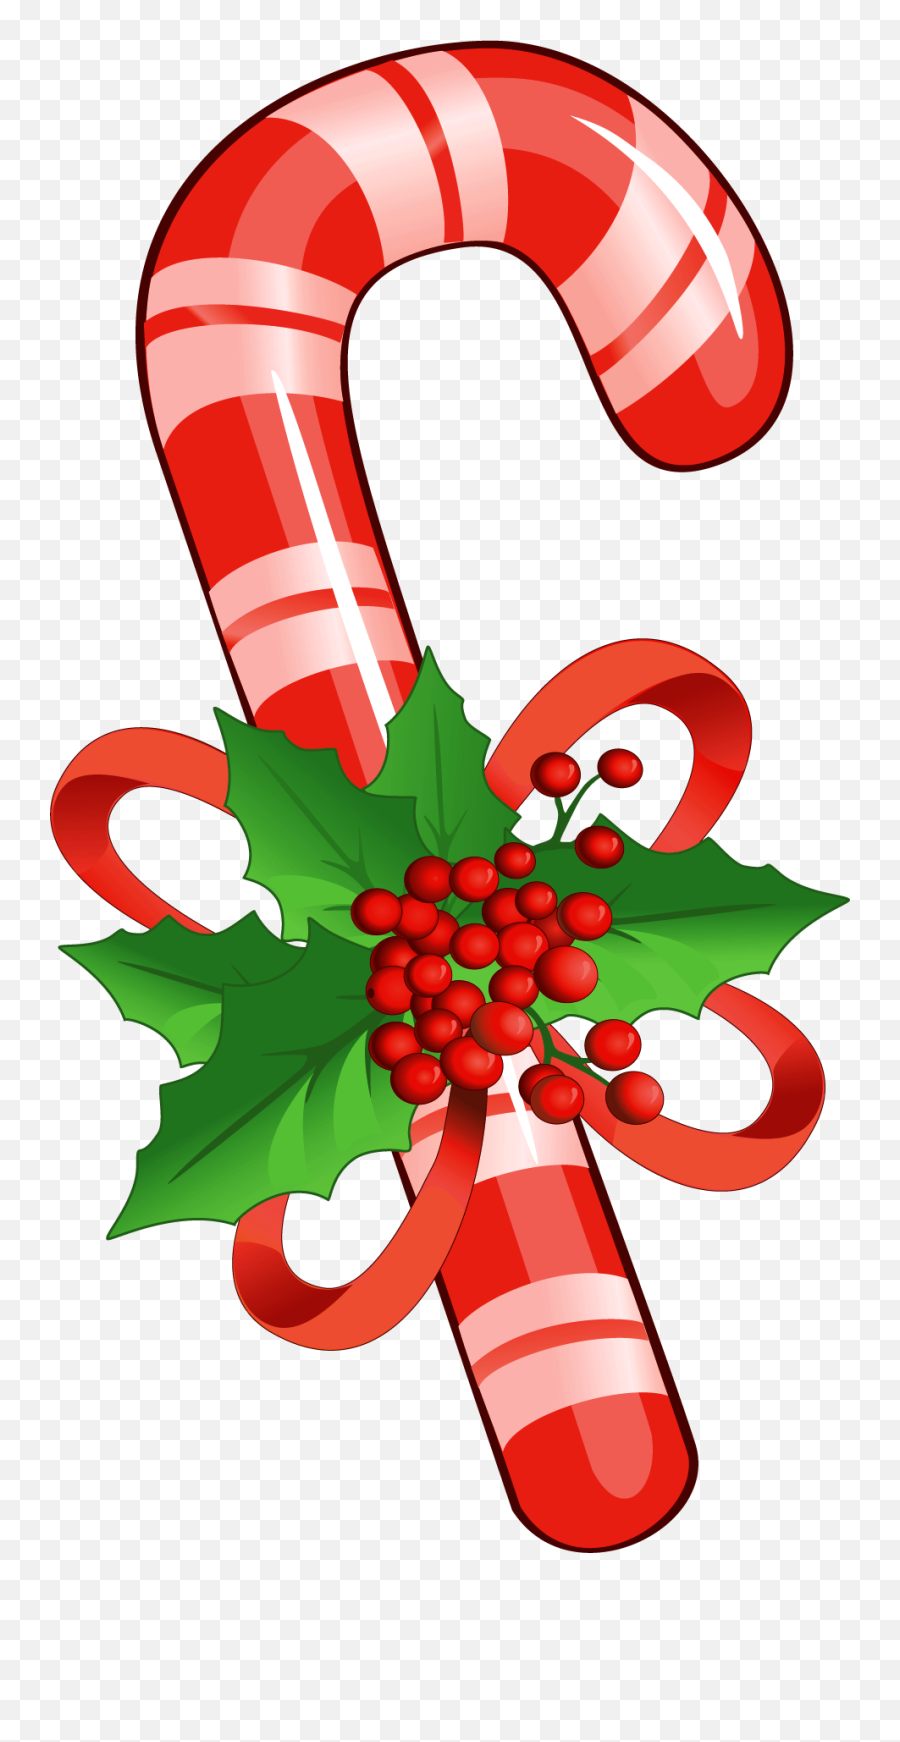 Christmas Candy Cane Png Image - Clipart Of Candy Cane,Candy Cane Transparent Background